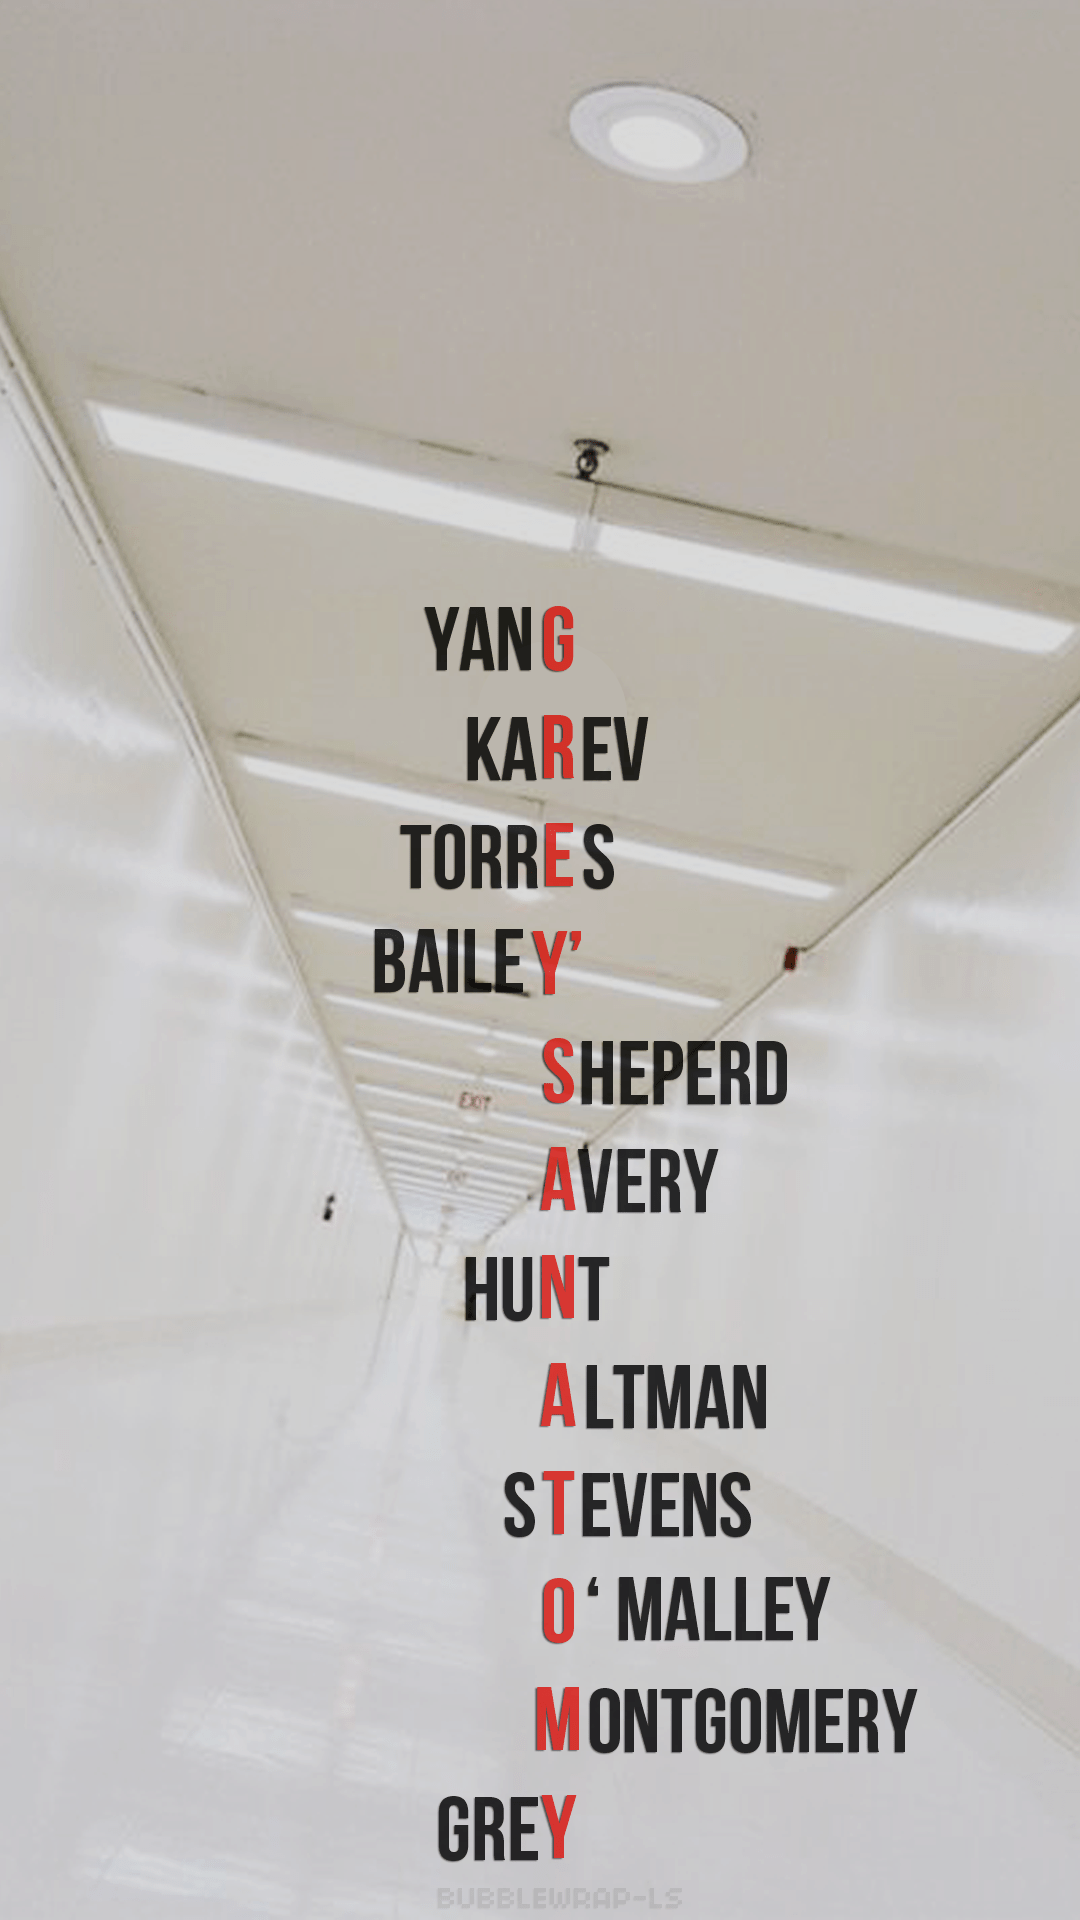 A poster with many names on it - Grey's Anatomy